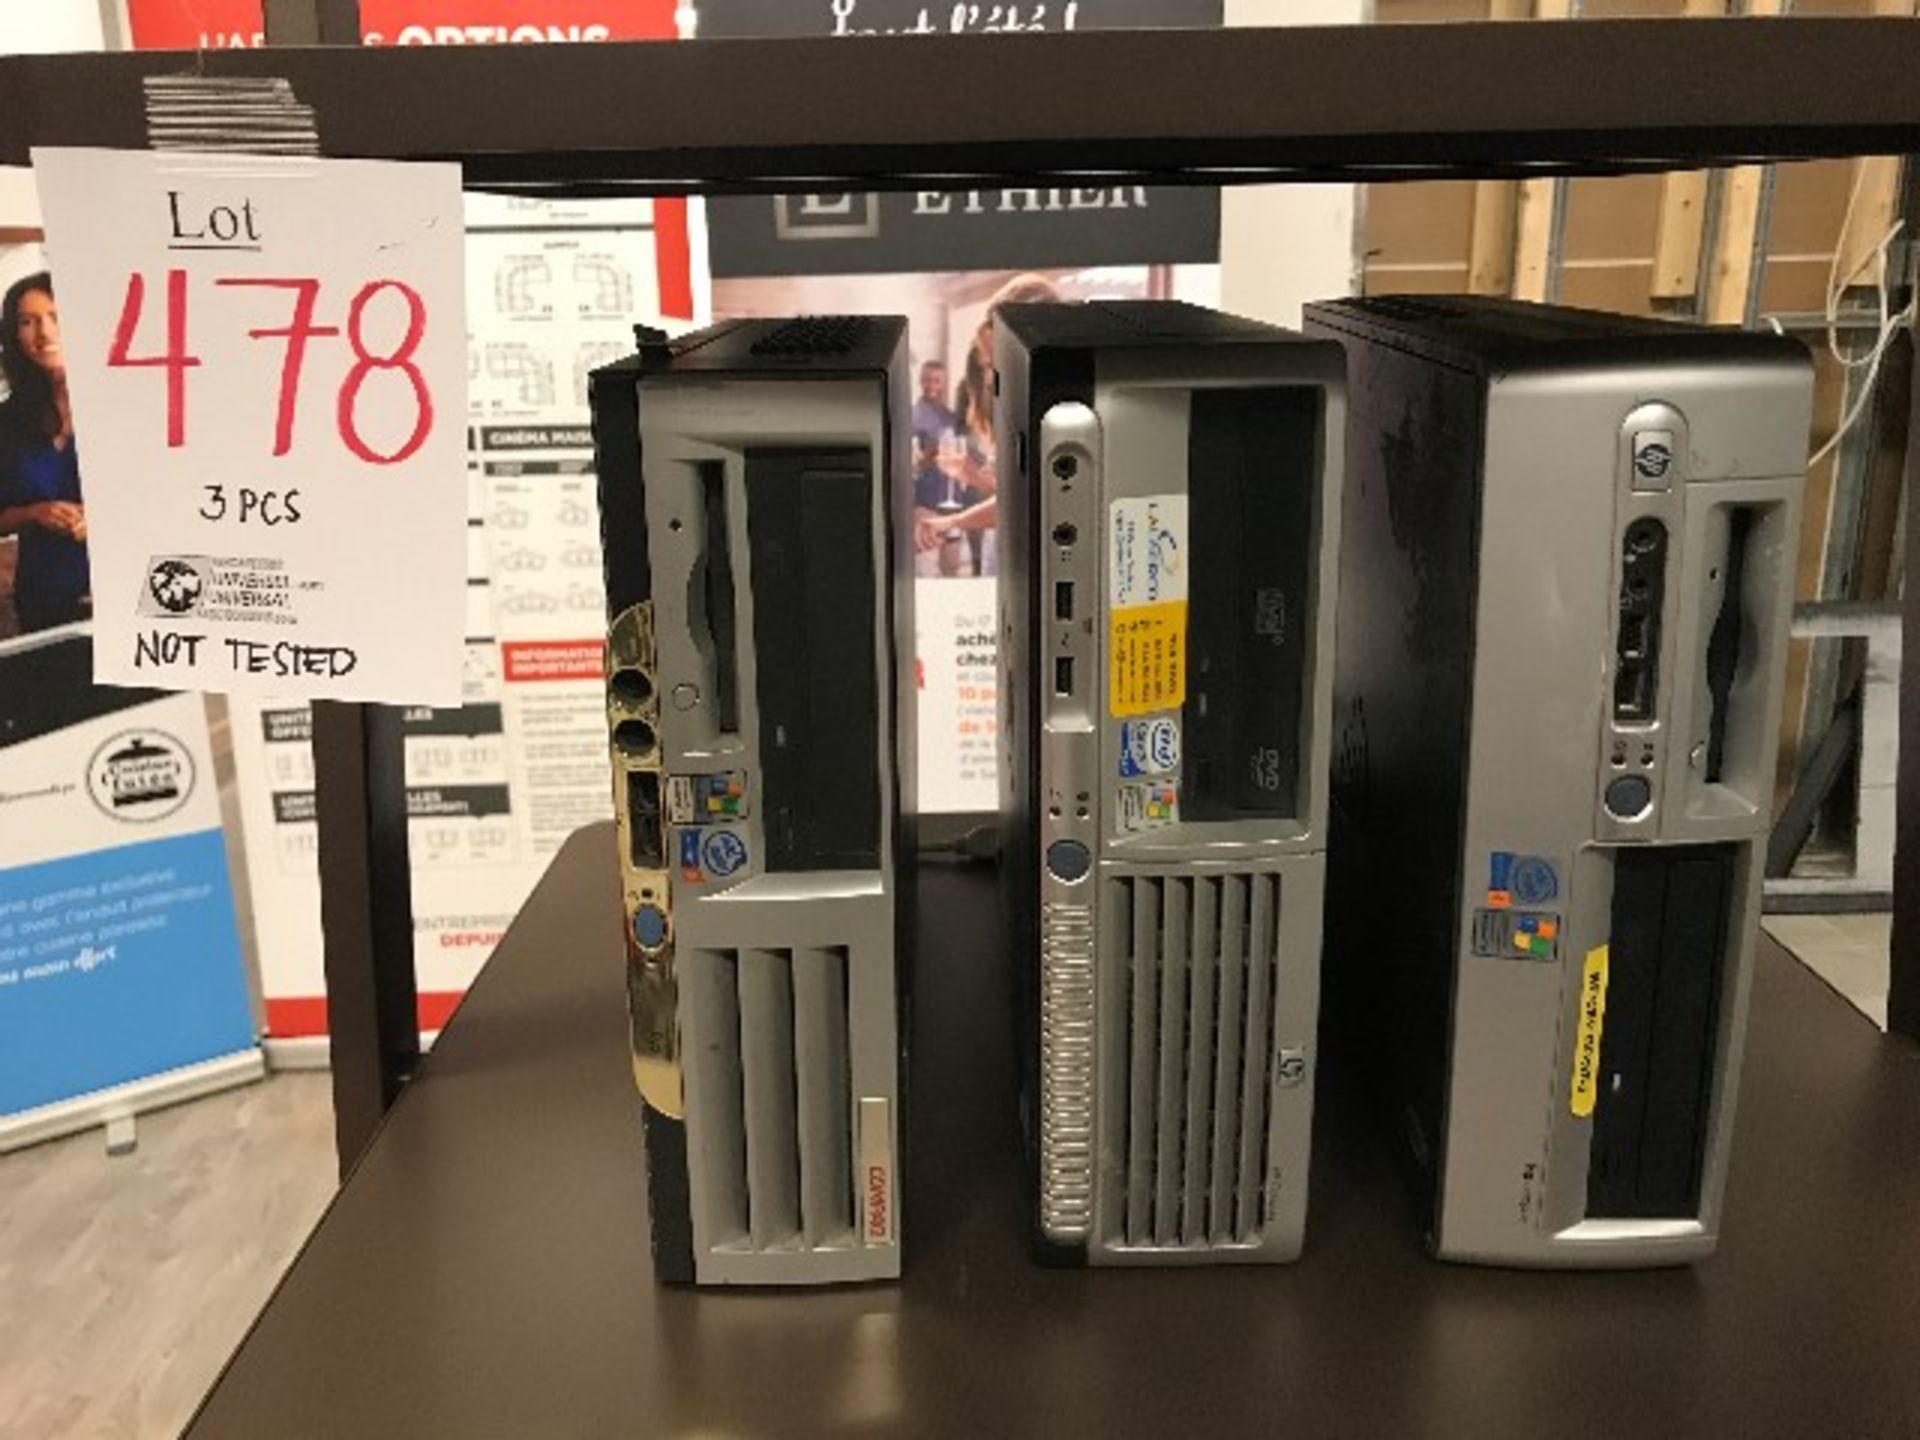 LOT: HP computers NOT TESTED,3pcs